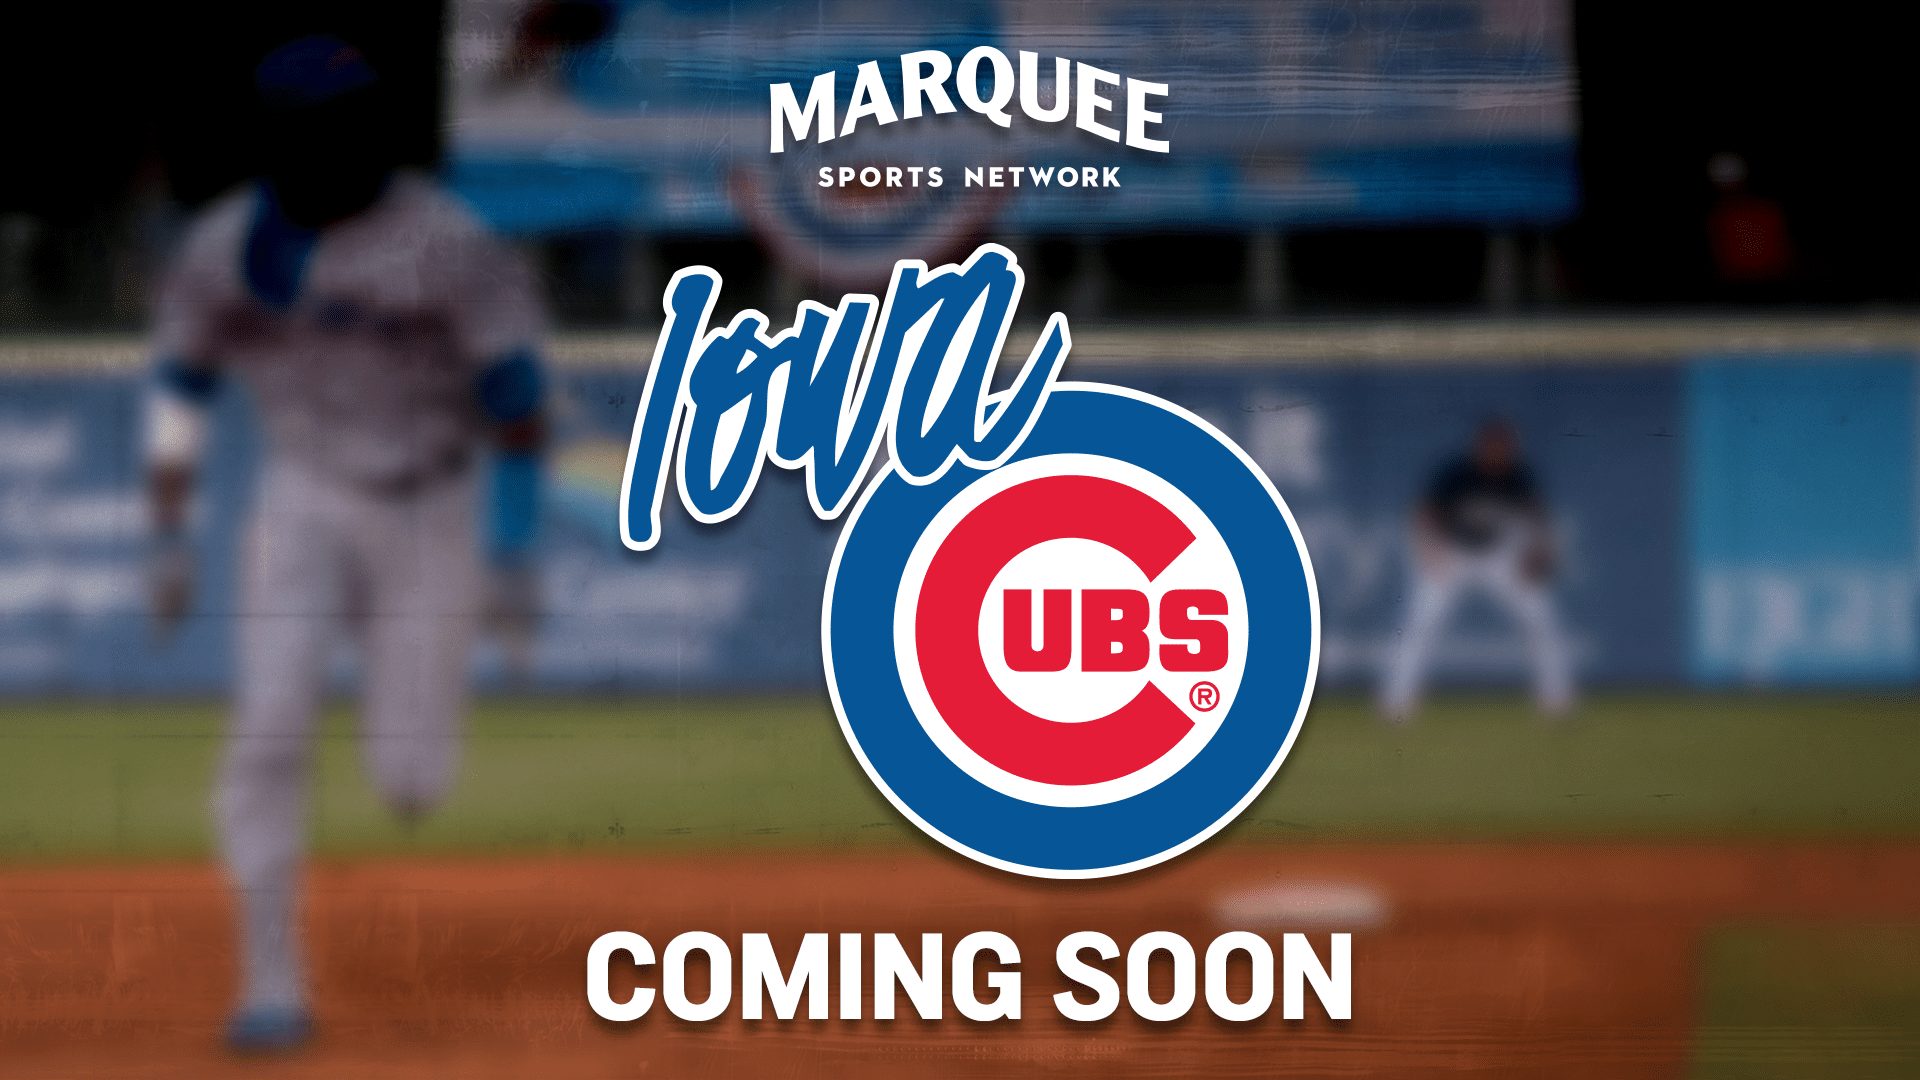 Icubs Schedule 2022 Marquee Sports Network Will Carry 14 Iowa Cubs Minor League Games During  2021 Season - Marquee Sports Network - Television Home Of The Chicago Cubs